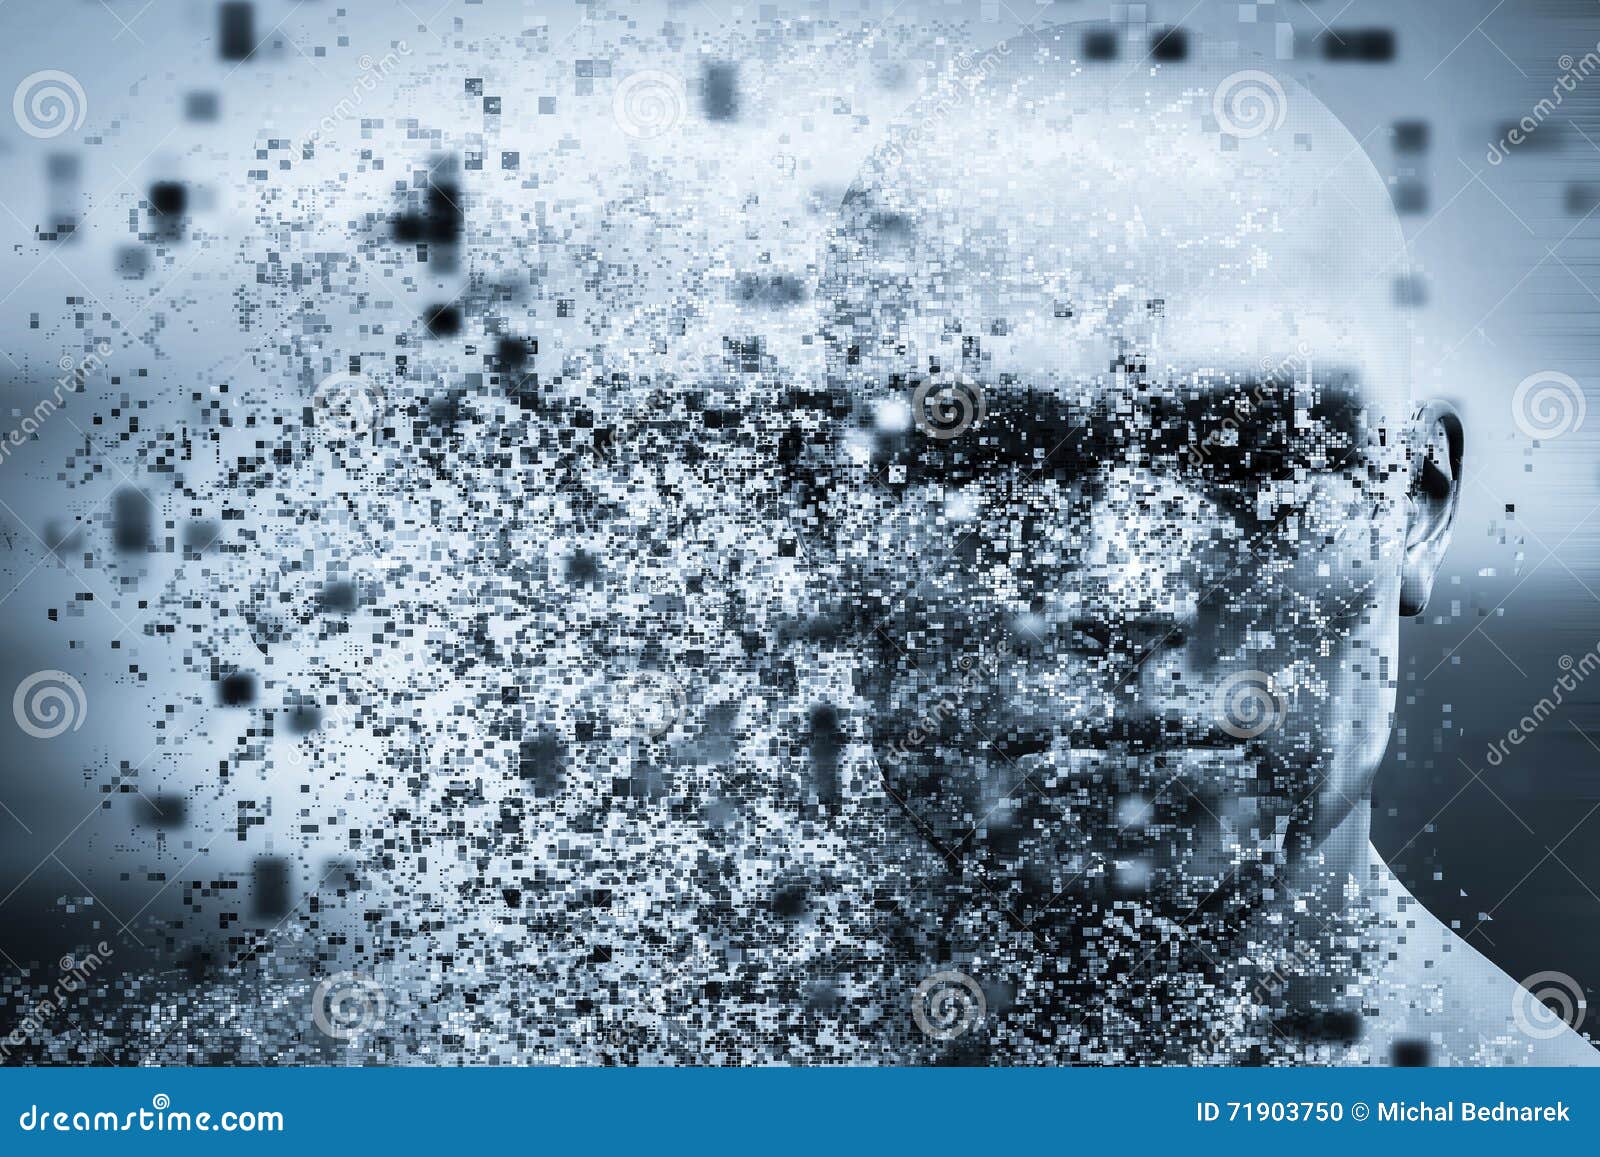 man face with pixel dispersion effect. concept of technology, modern science but also disintegration